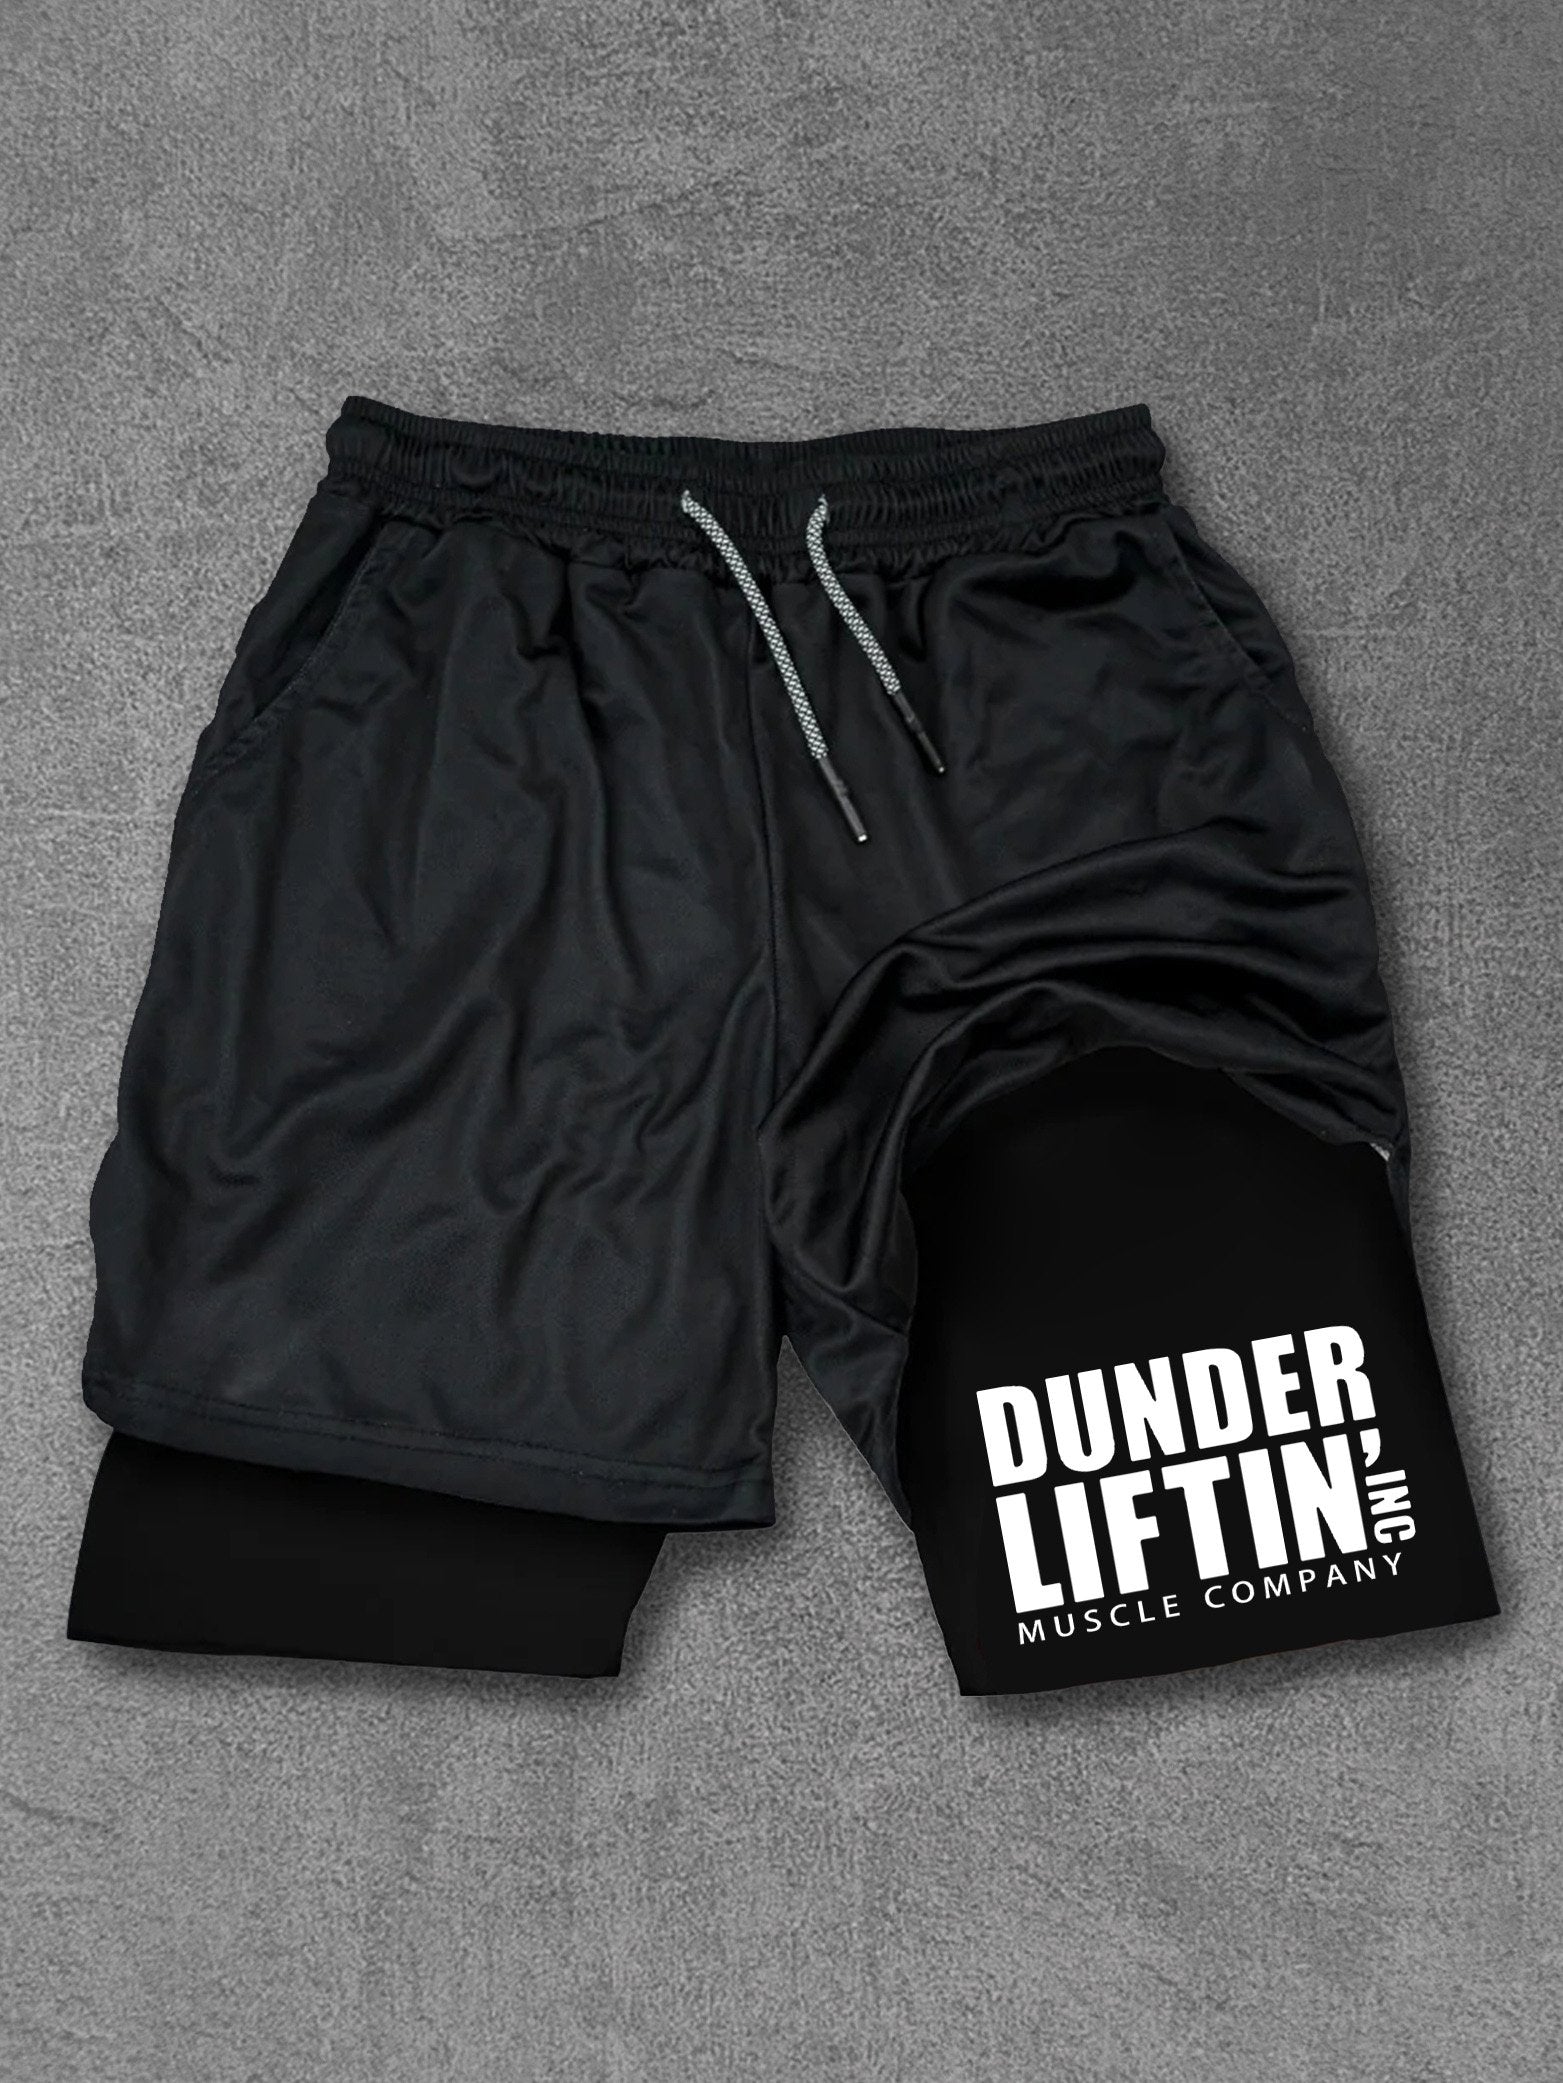 dunder lifting muscle company Performance Training Shorts